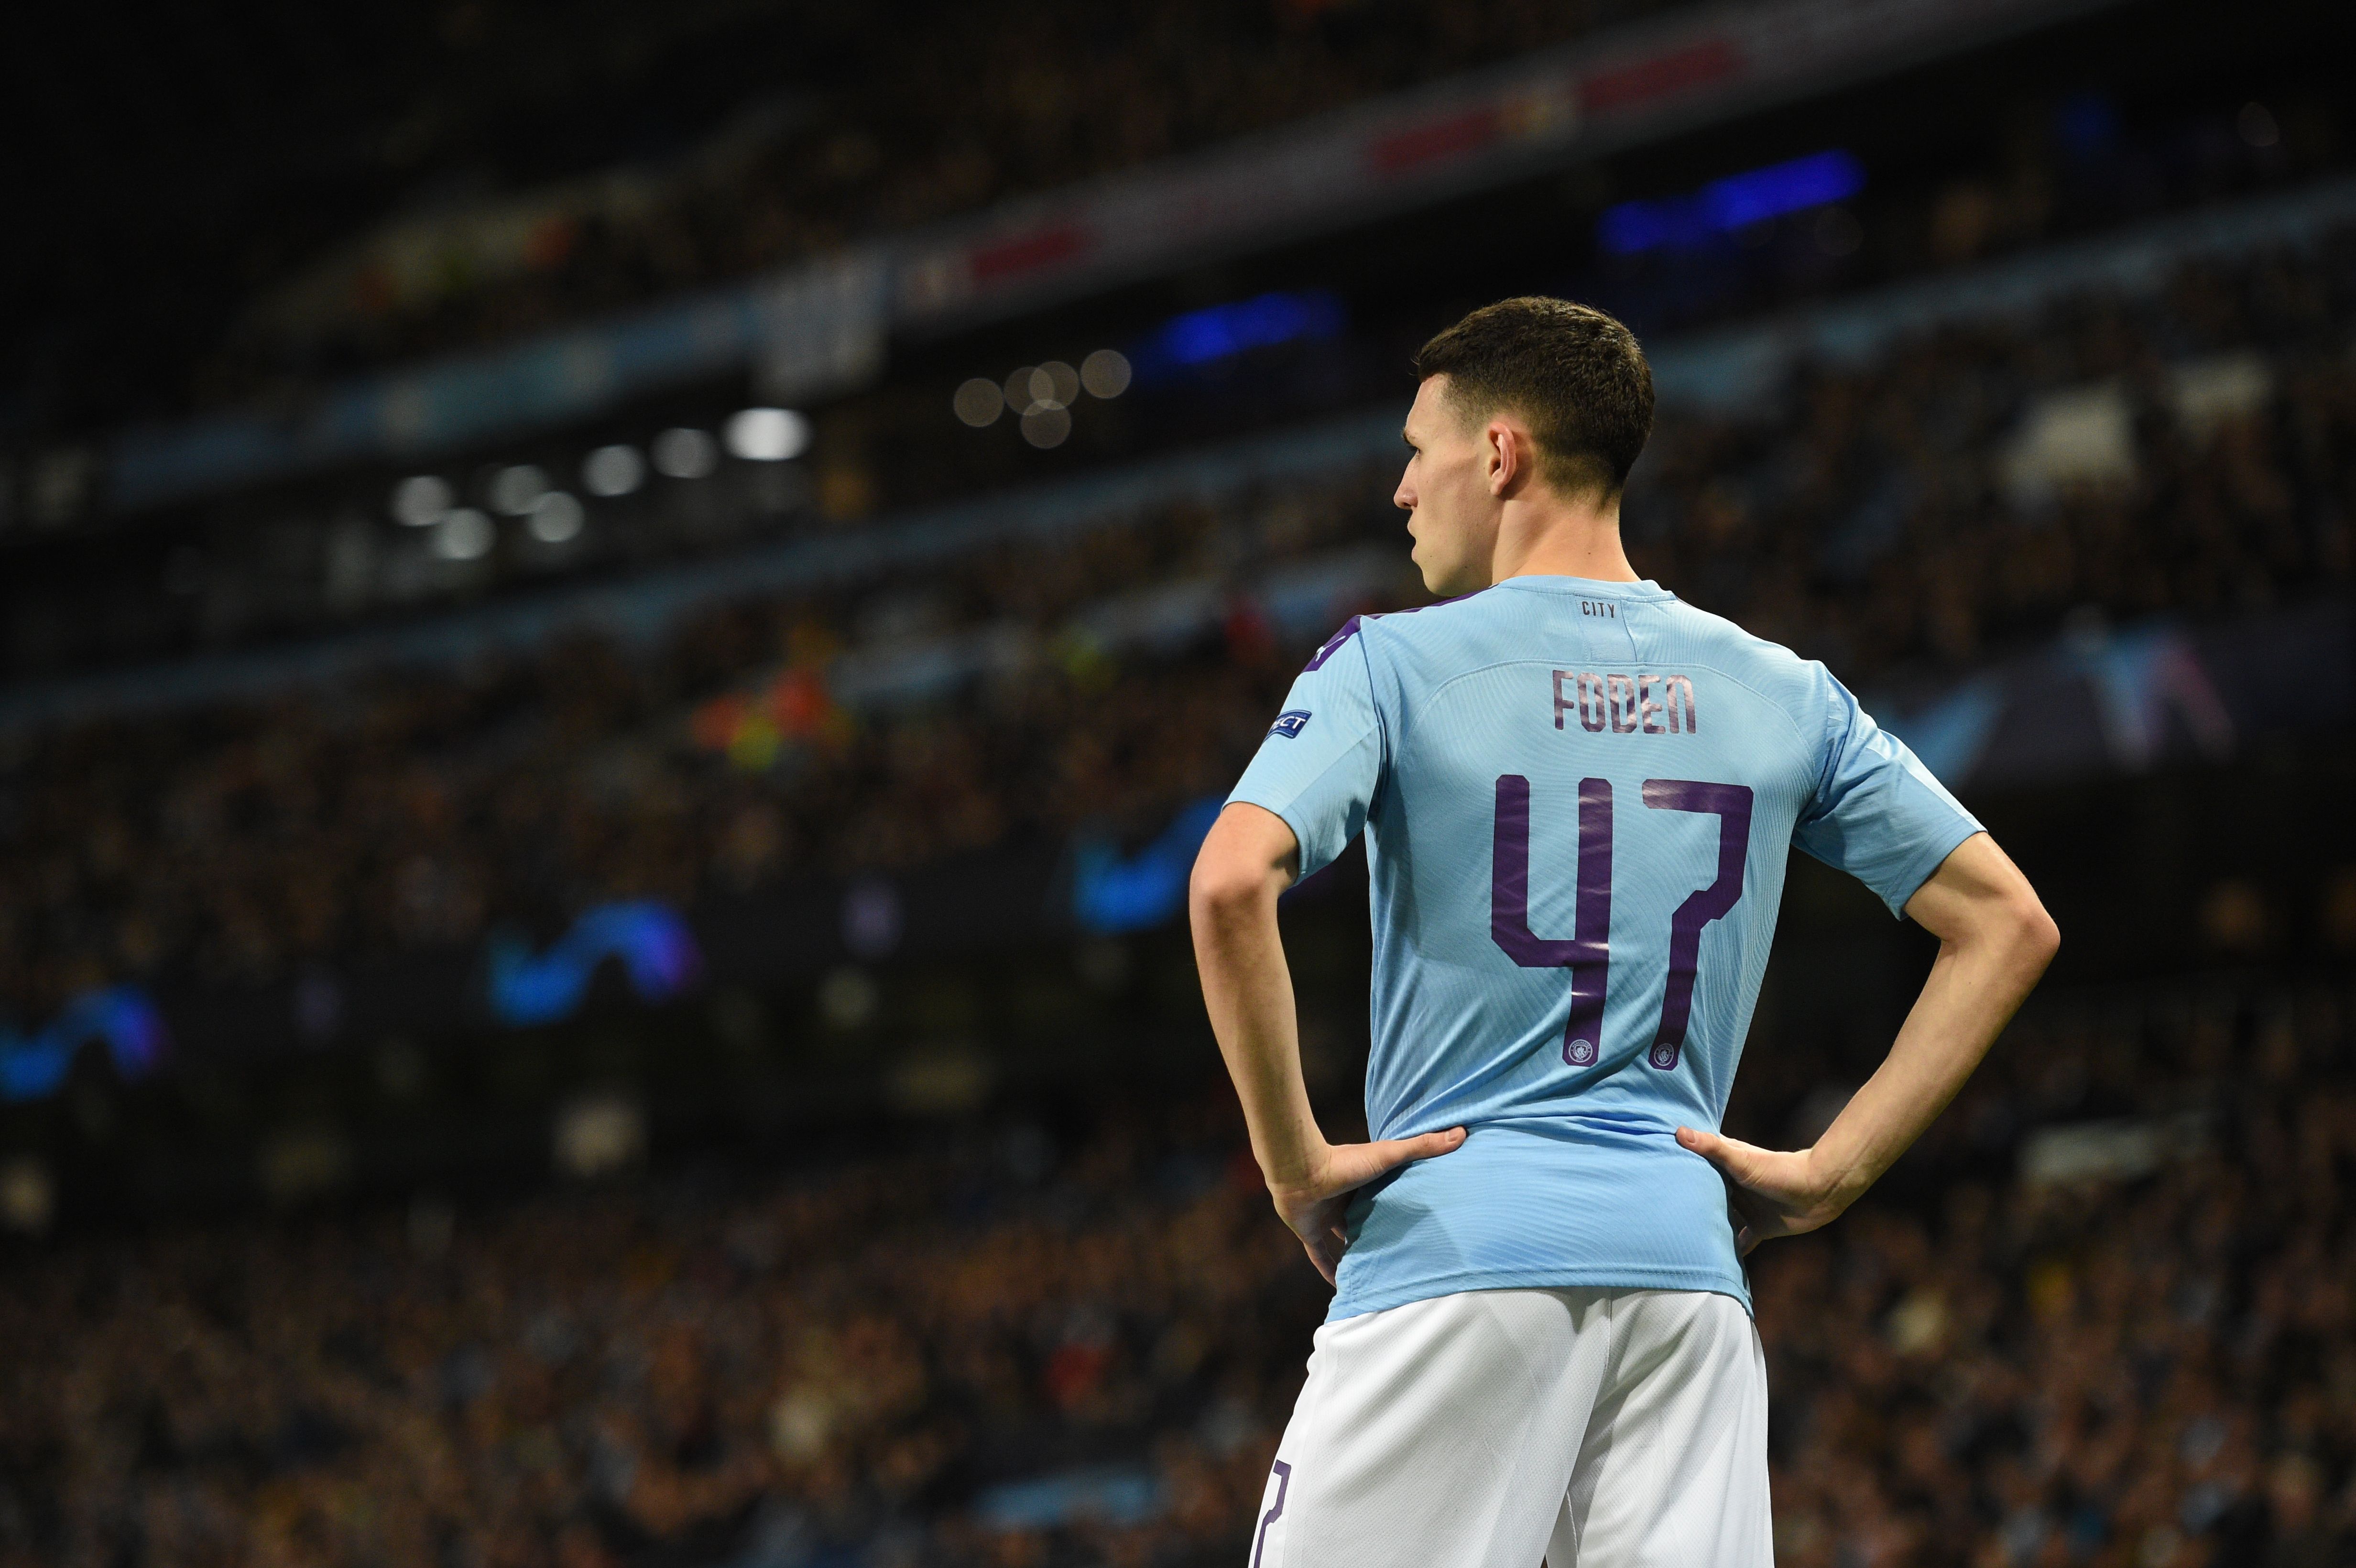 Foden is set to miss out for Manchester City. (Photo by Oli Scarff/AFP via Getty Images)